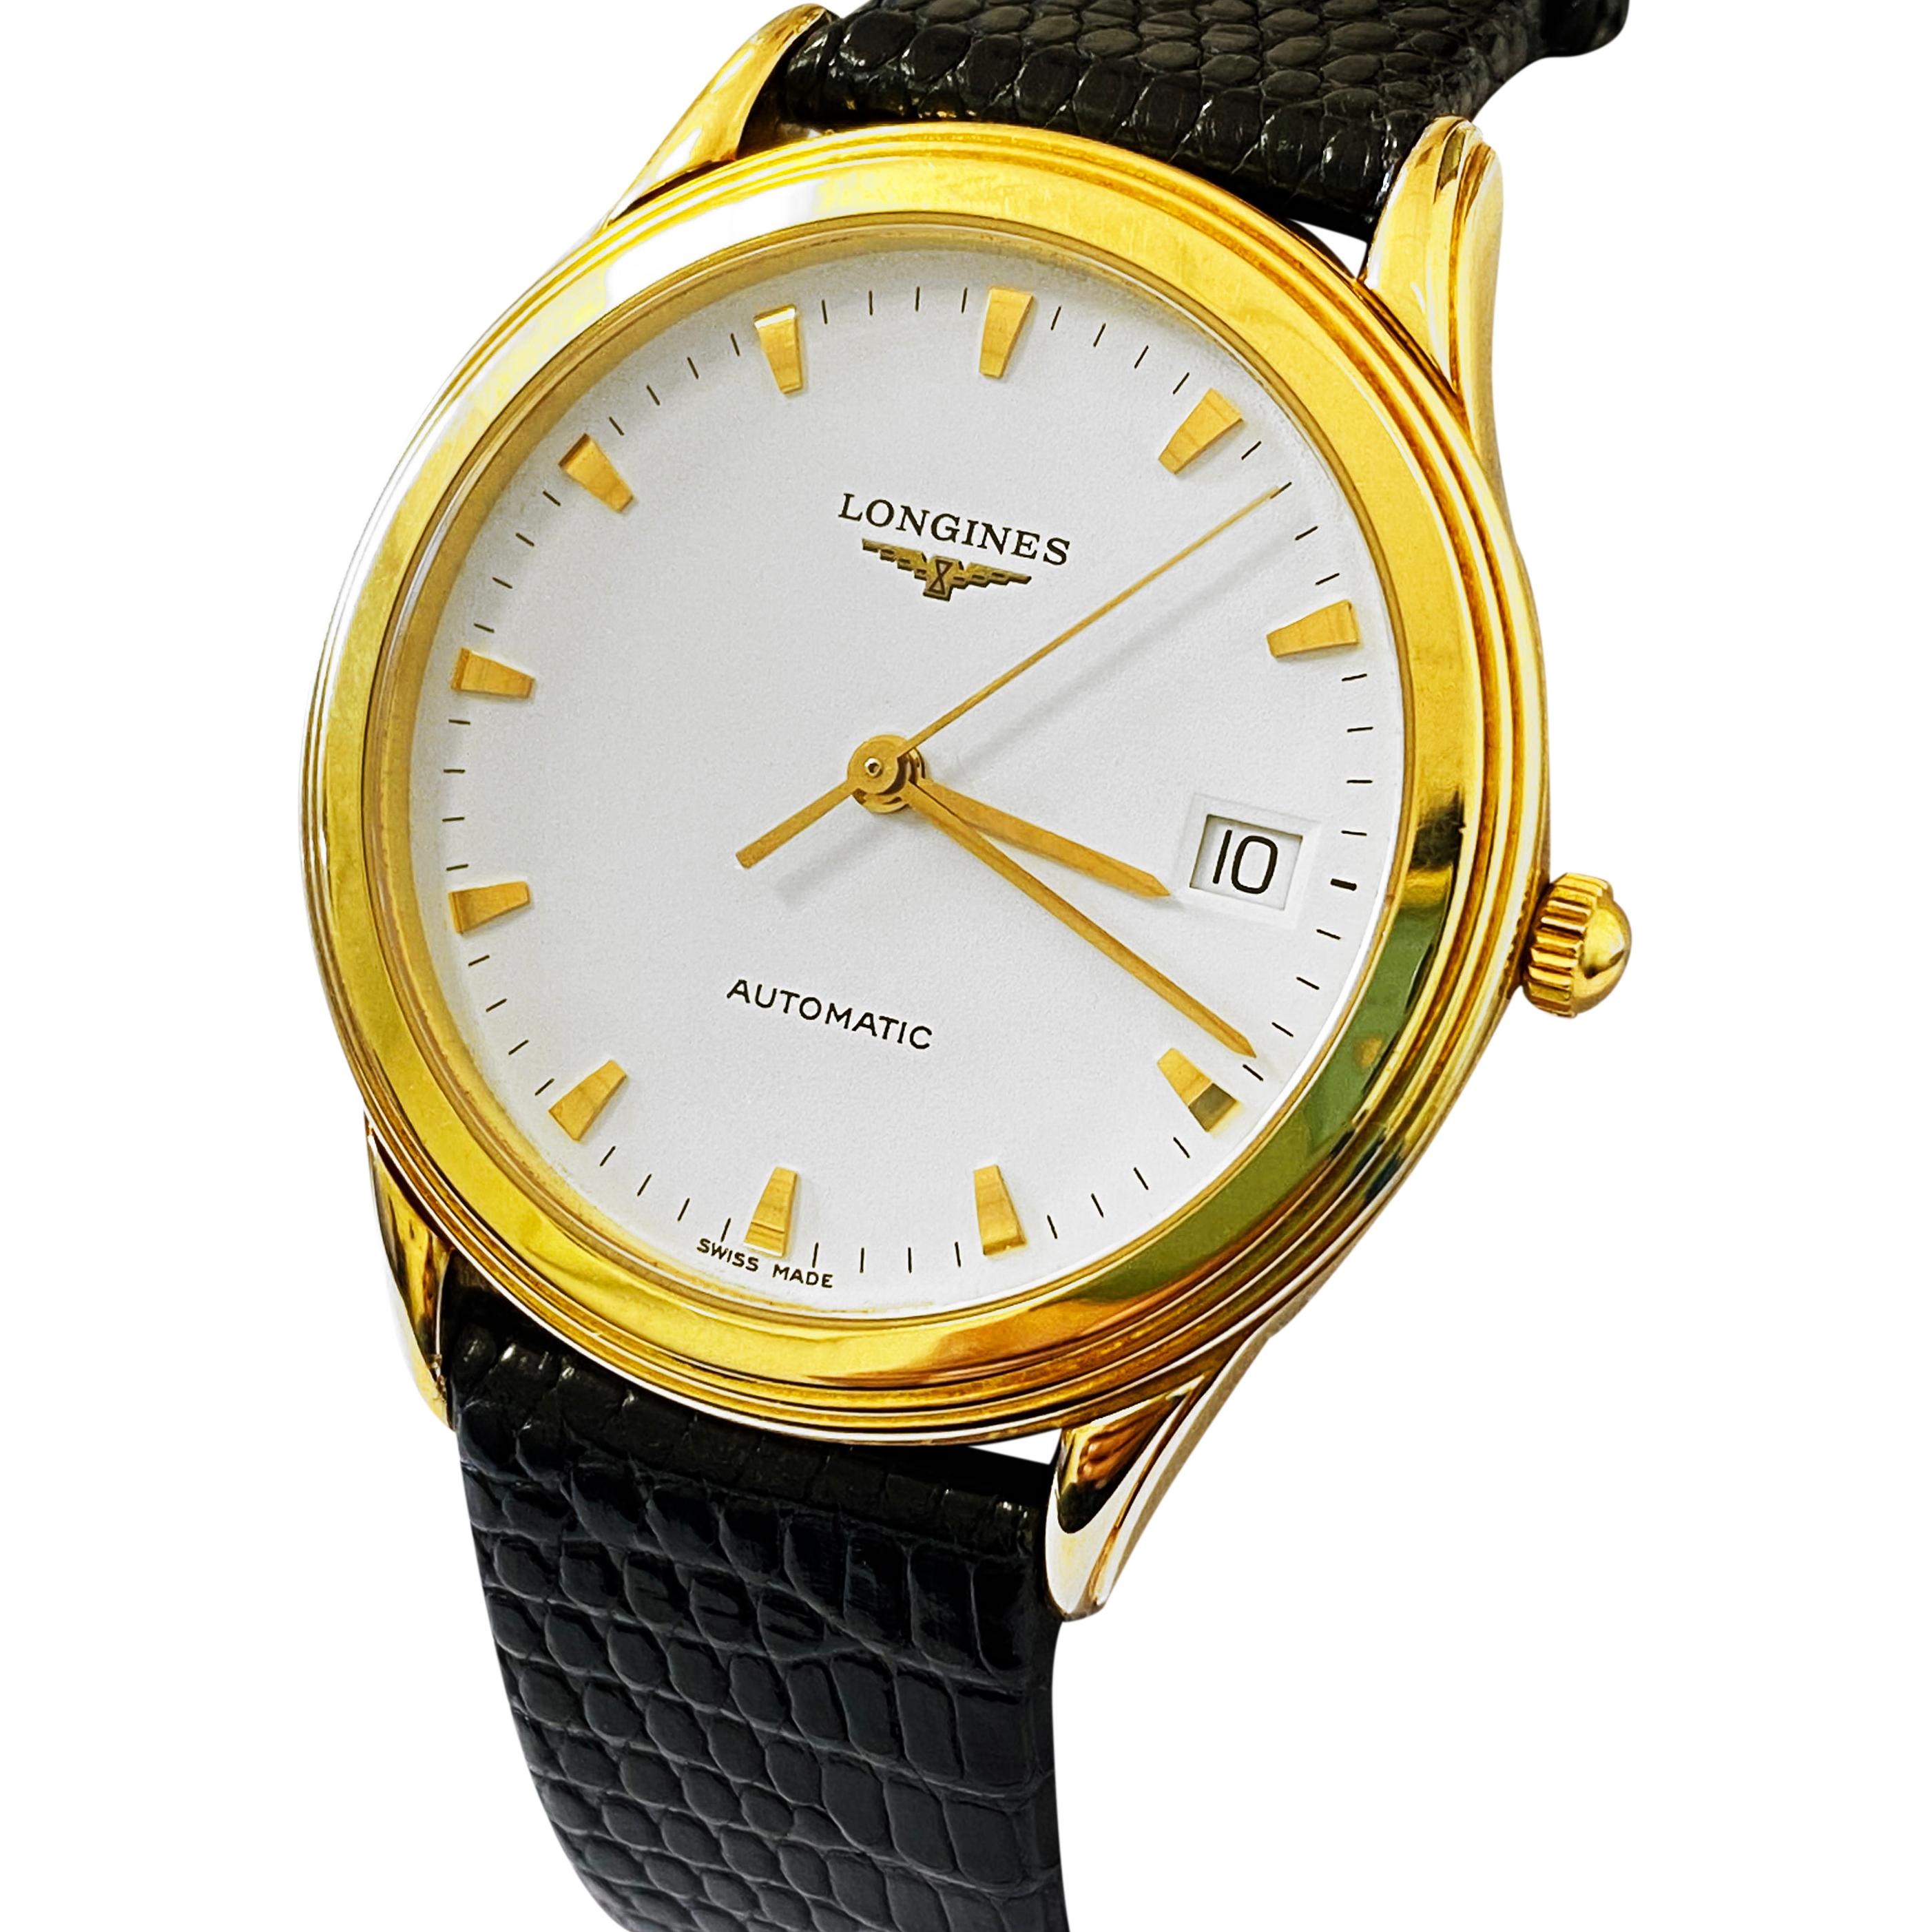 Brand: Longines
Model: Flagship
Bracelet material: Crocodile skin
Case material: 18k yellow gold
Movement: Automatic
Clasp: Buckle
Date


No box no papers